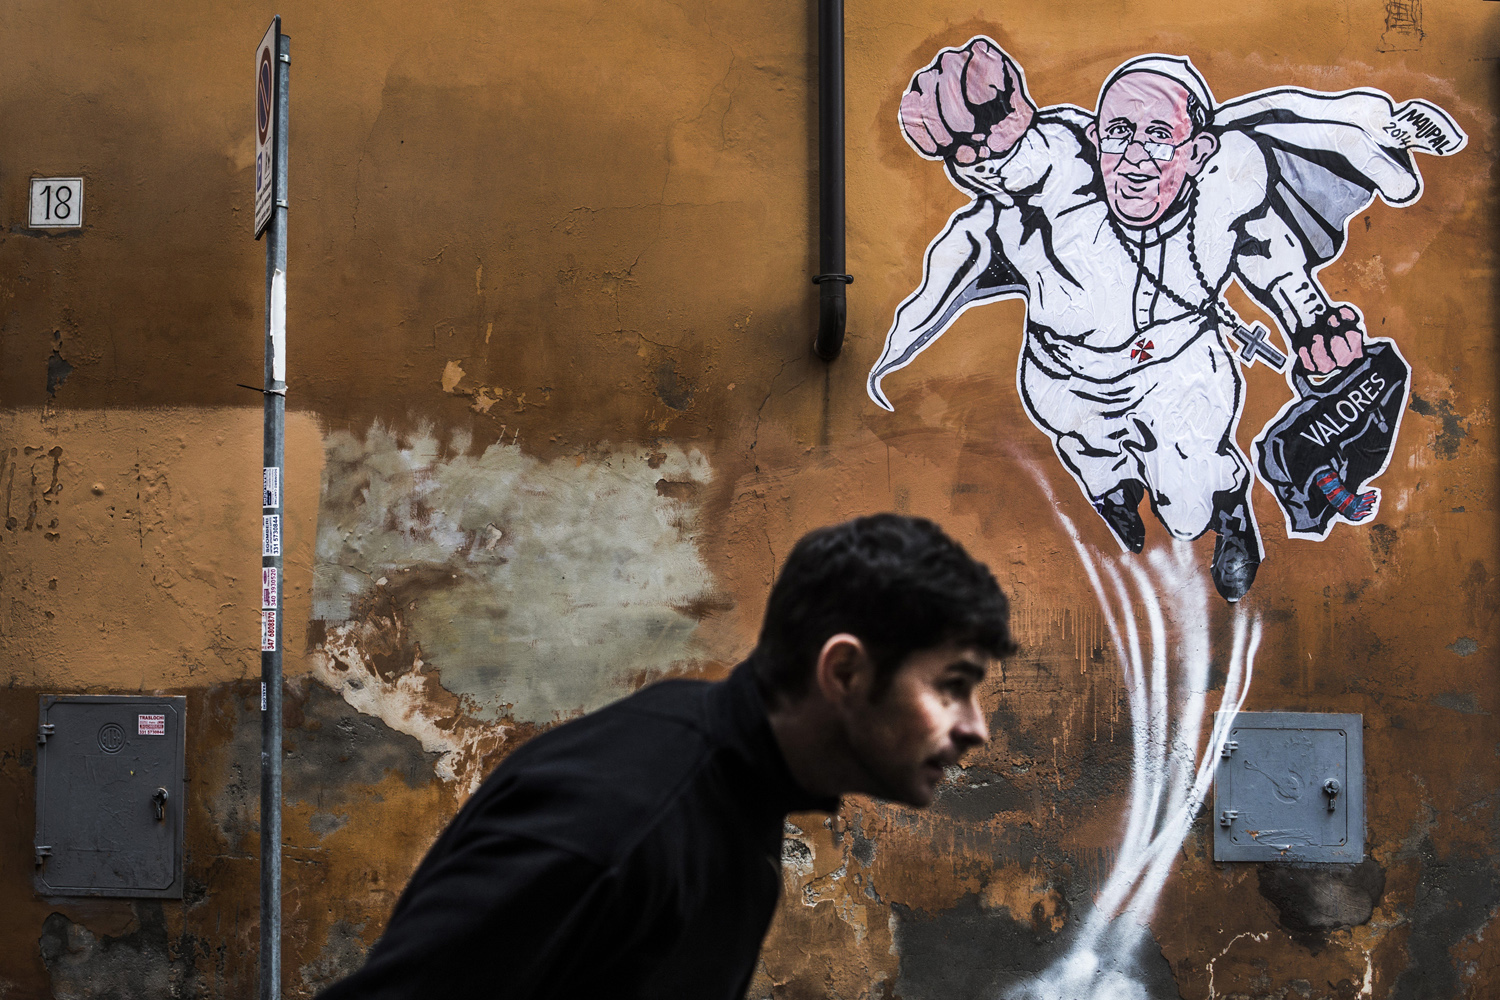 Italy - Feature - First Pope Francis graffiti murales appears in Rome